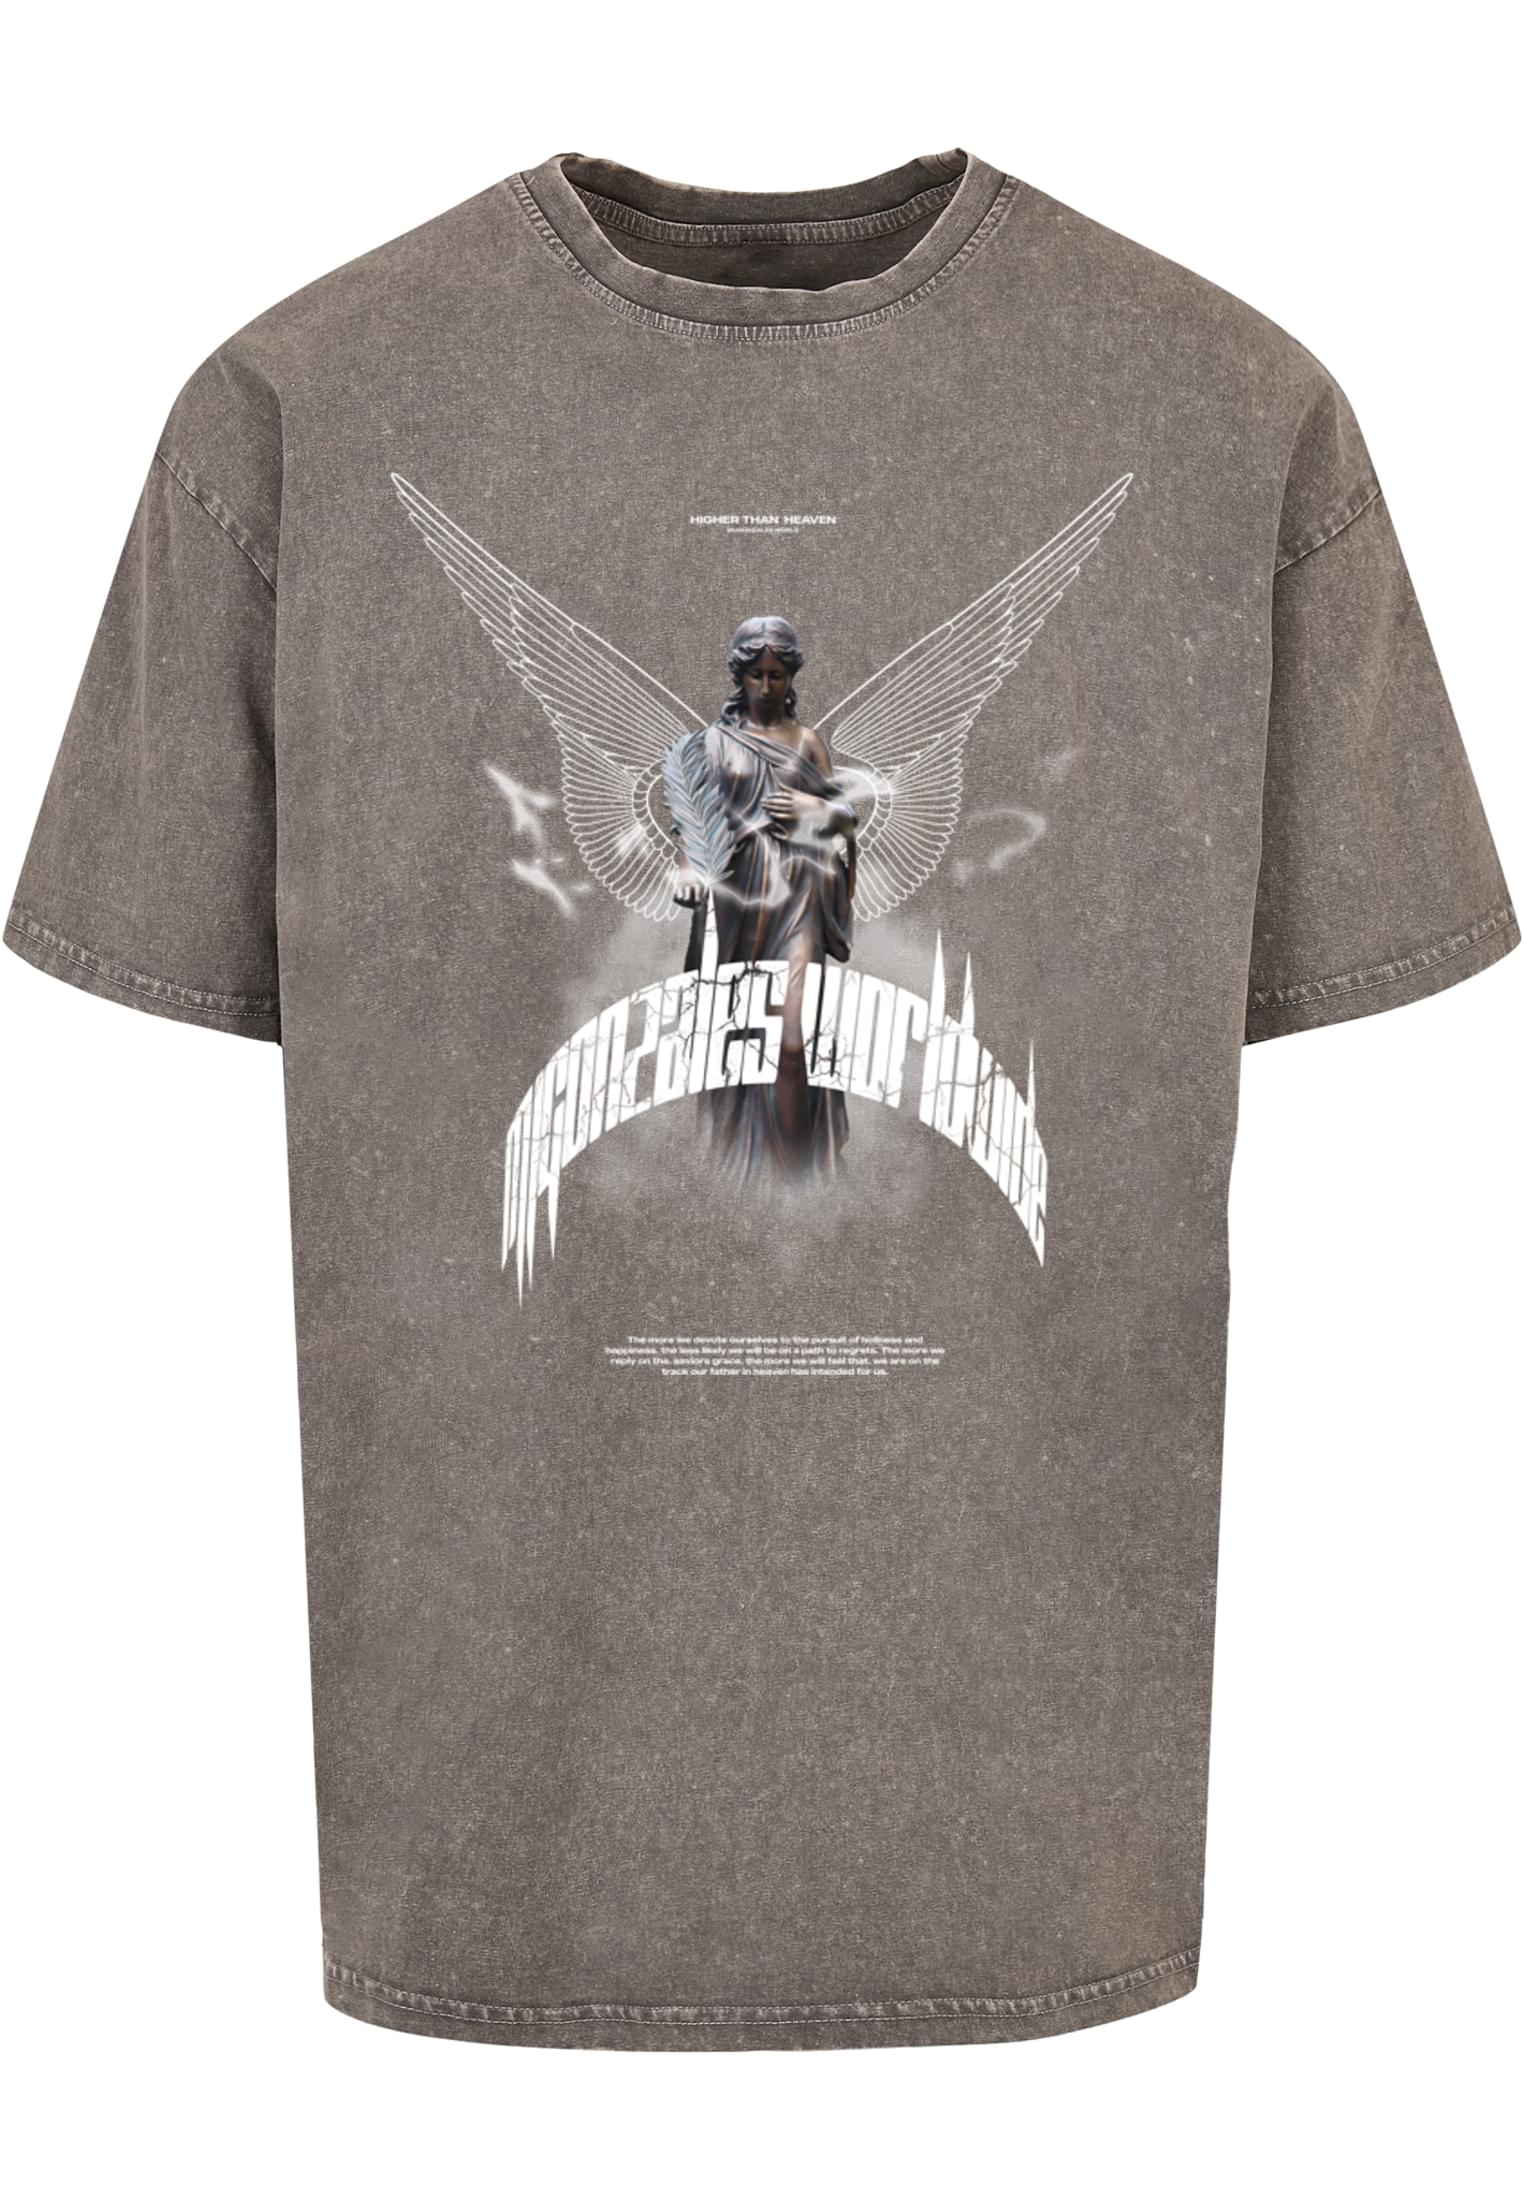 HIGHER THAN HEAVEN V.1 Acid Washed Heavy Oversize Tee